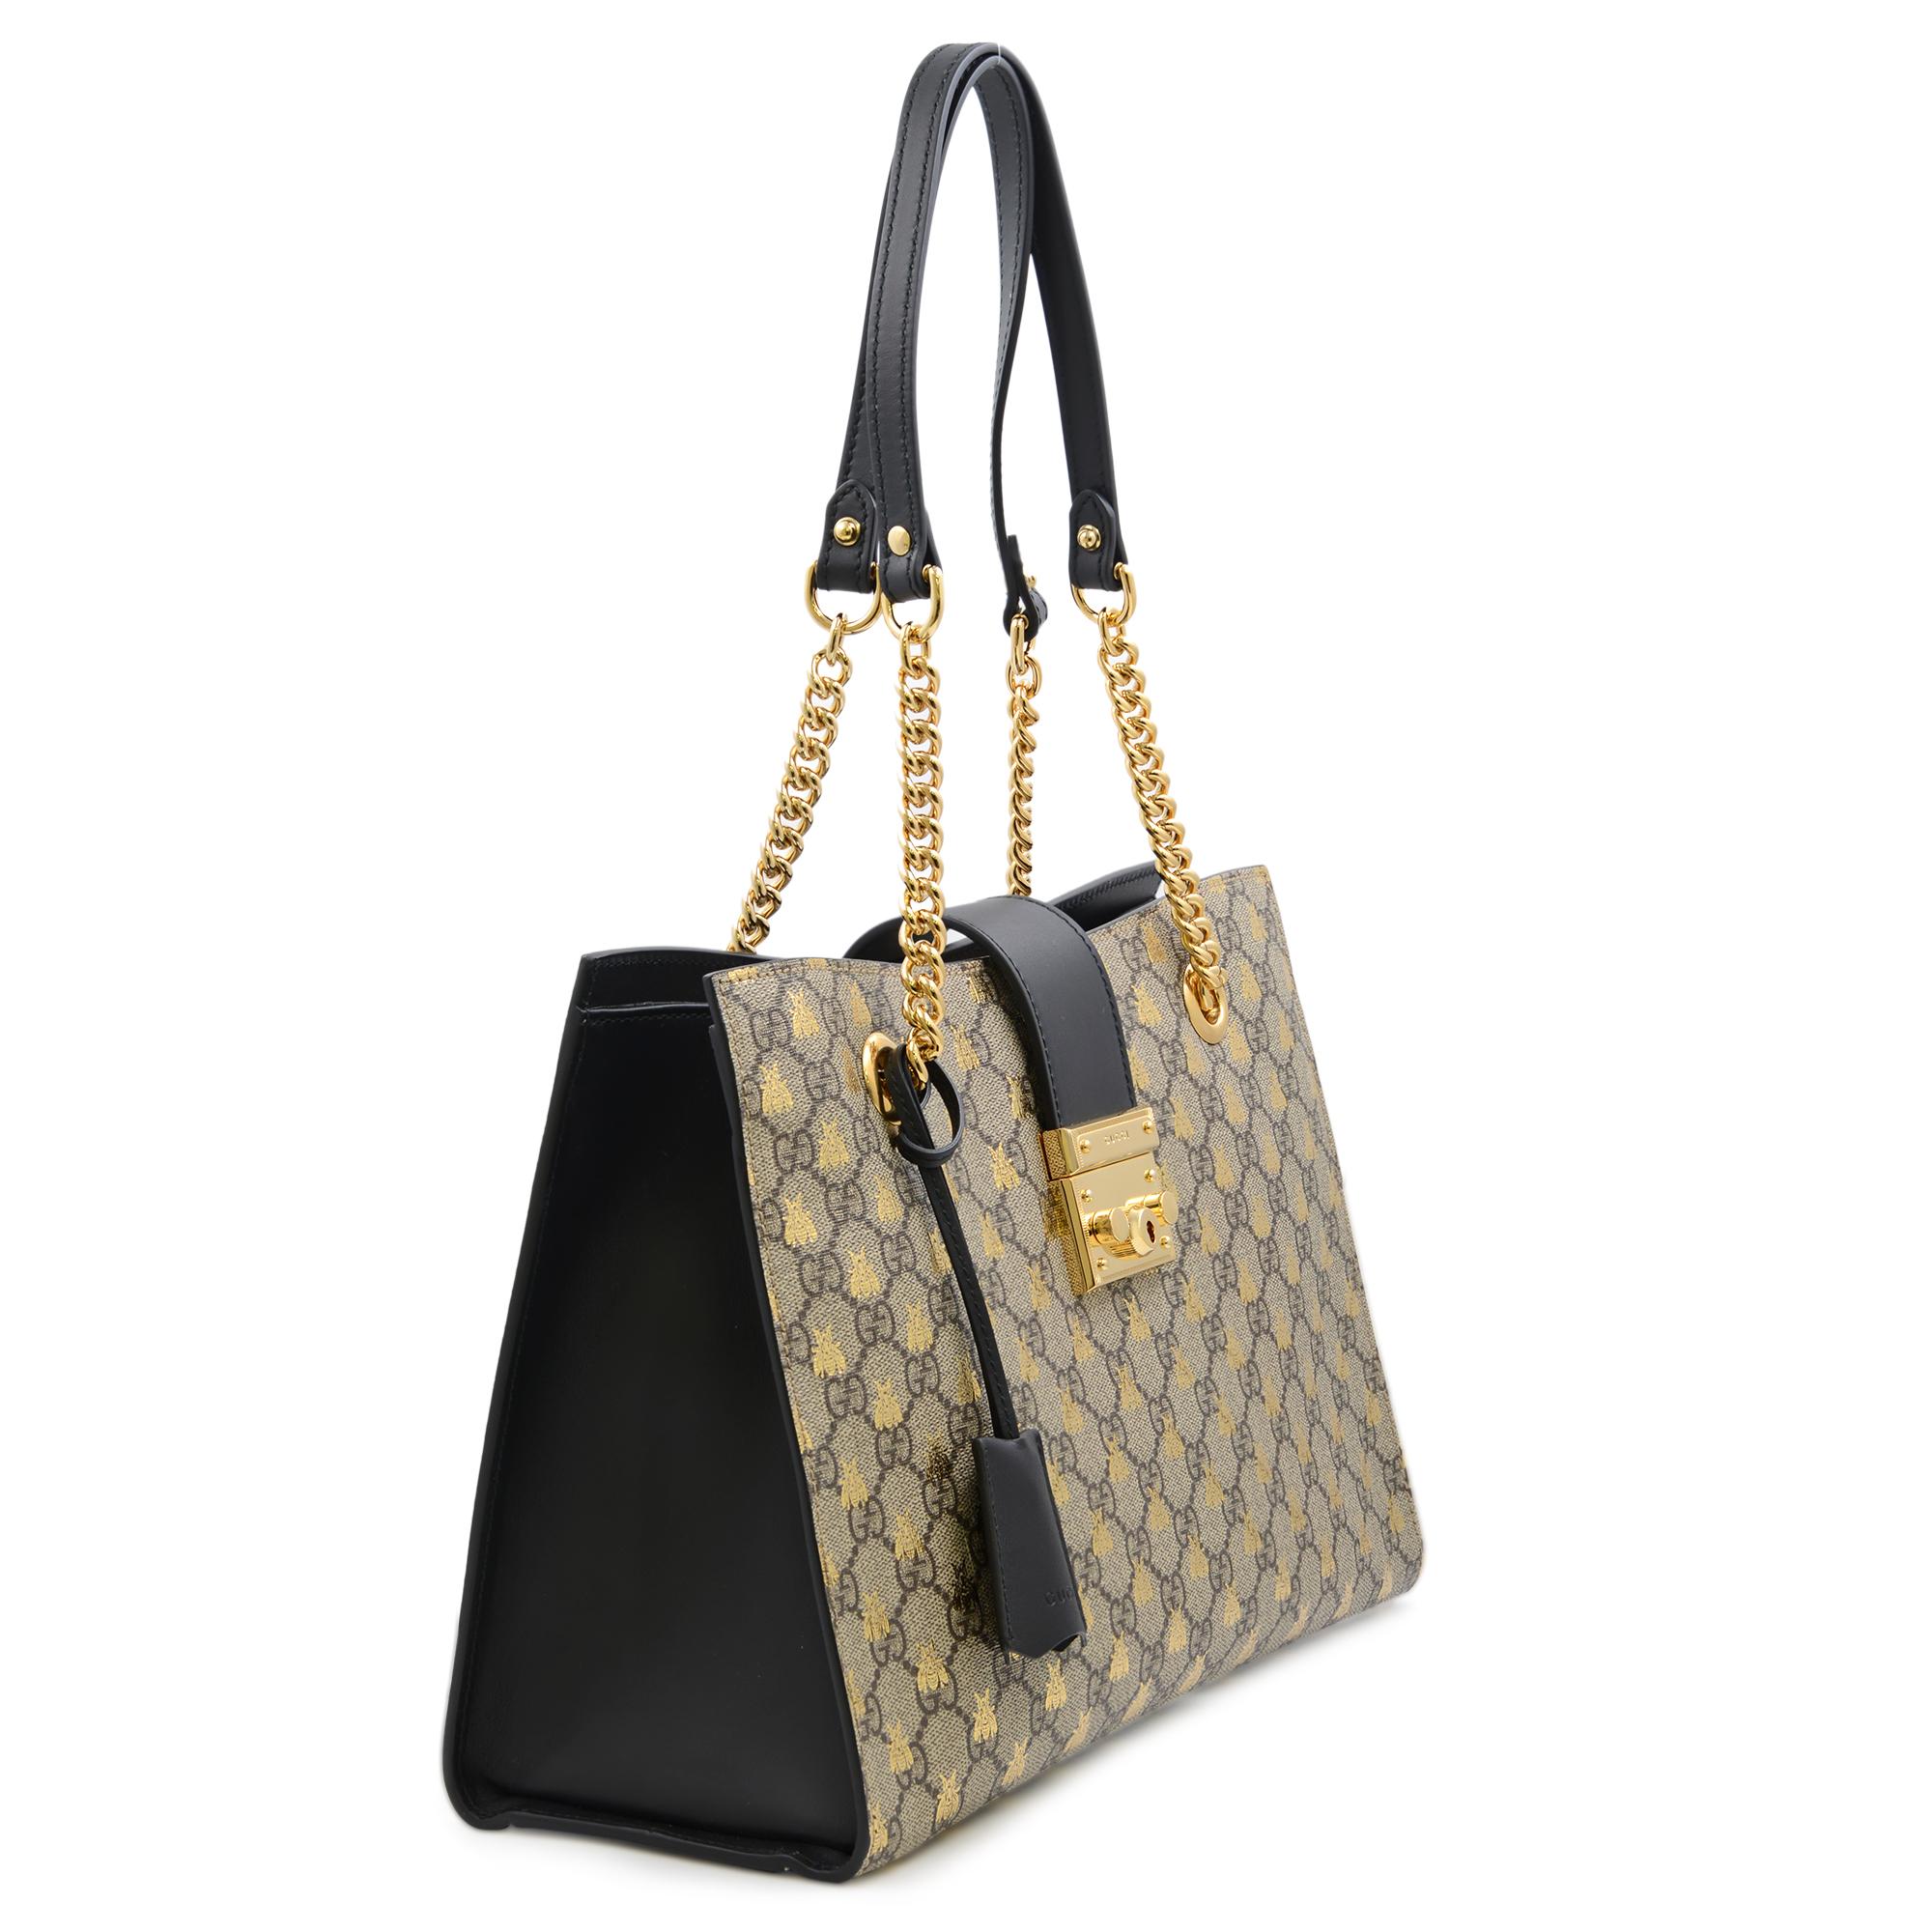 A structured shoulder bag by Gucci in GG Supreme gold Bee print with leather and chain shoulder straps; 9.5 inches drop. Open top with flap-over padlock closure. Gold-tone hardware. Key with hanging leather holder. Interior two open and one zip